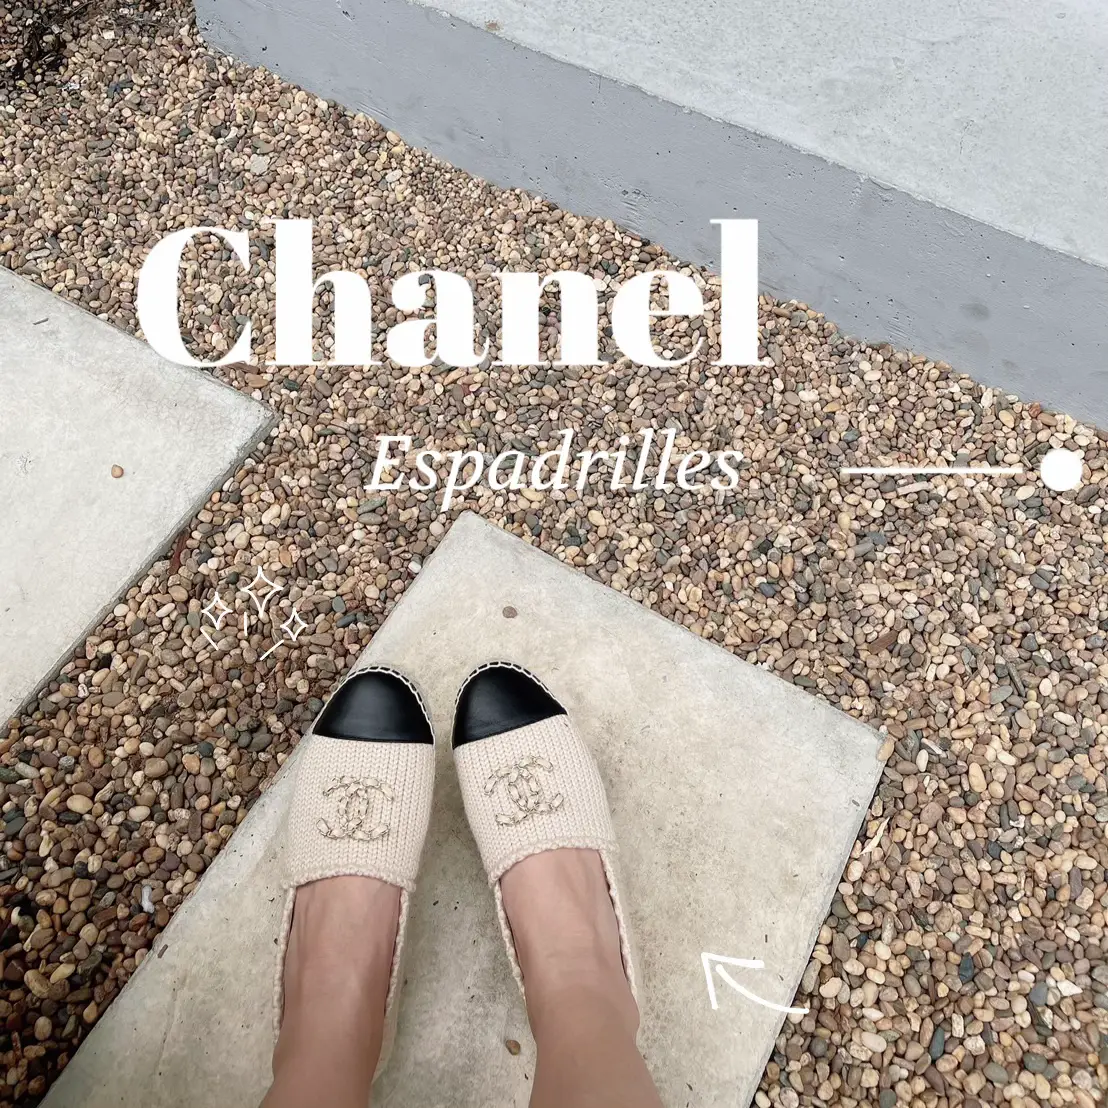 Chanel espadrilles shoes that girls must have ✨, Gallery posted by DRICE